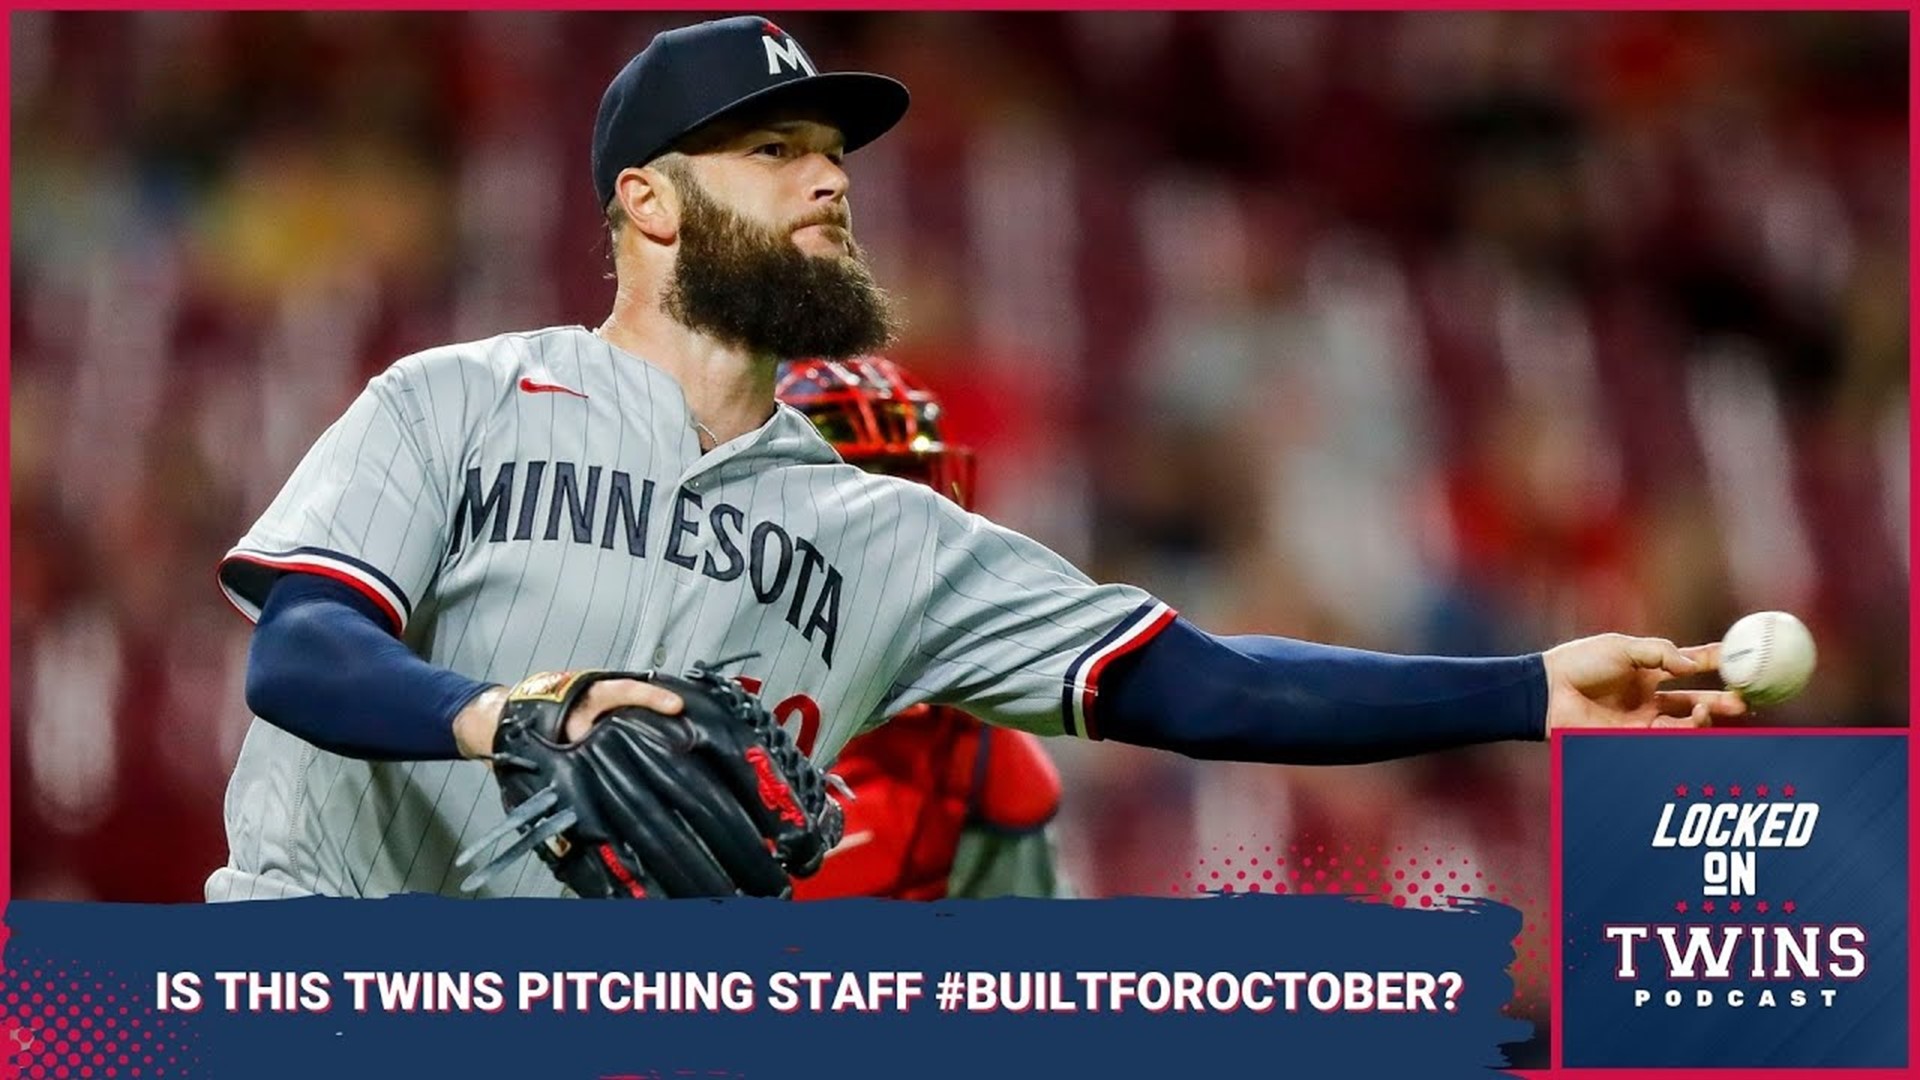 Believe it or Not: The Twins Pitching Staff is #BuiltForOctober